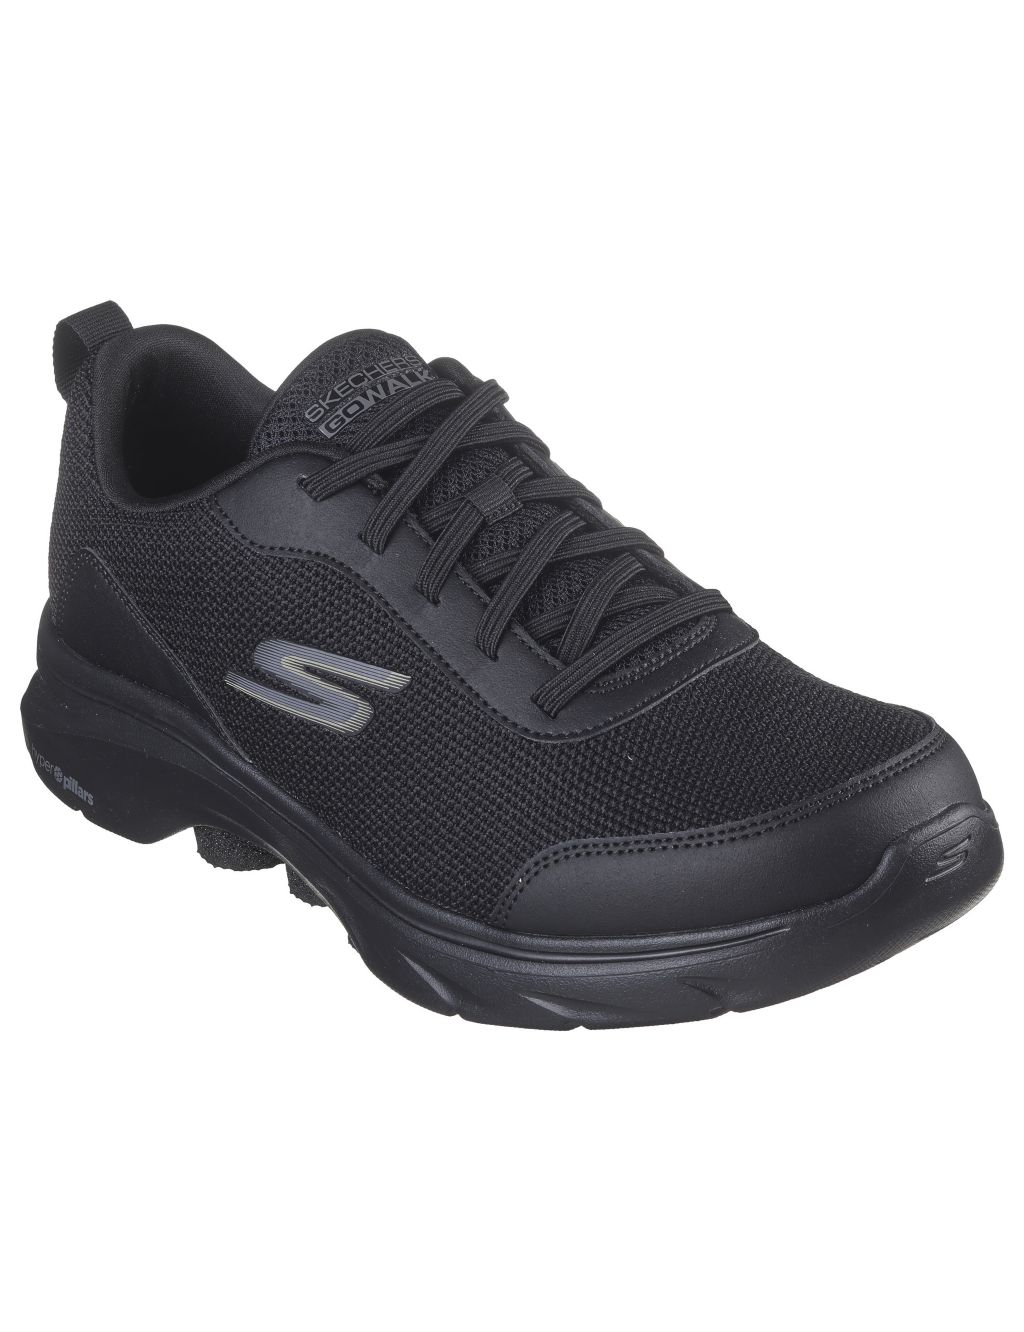 Go Walk 7 Lace Up Trainers | Skechers | M&S